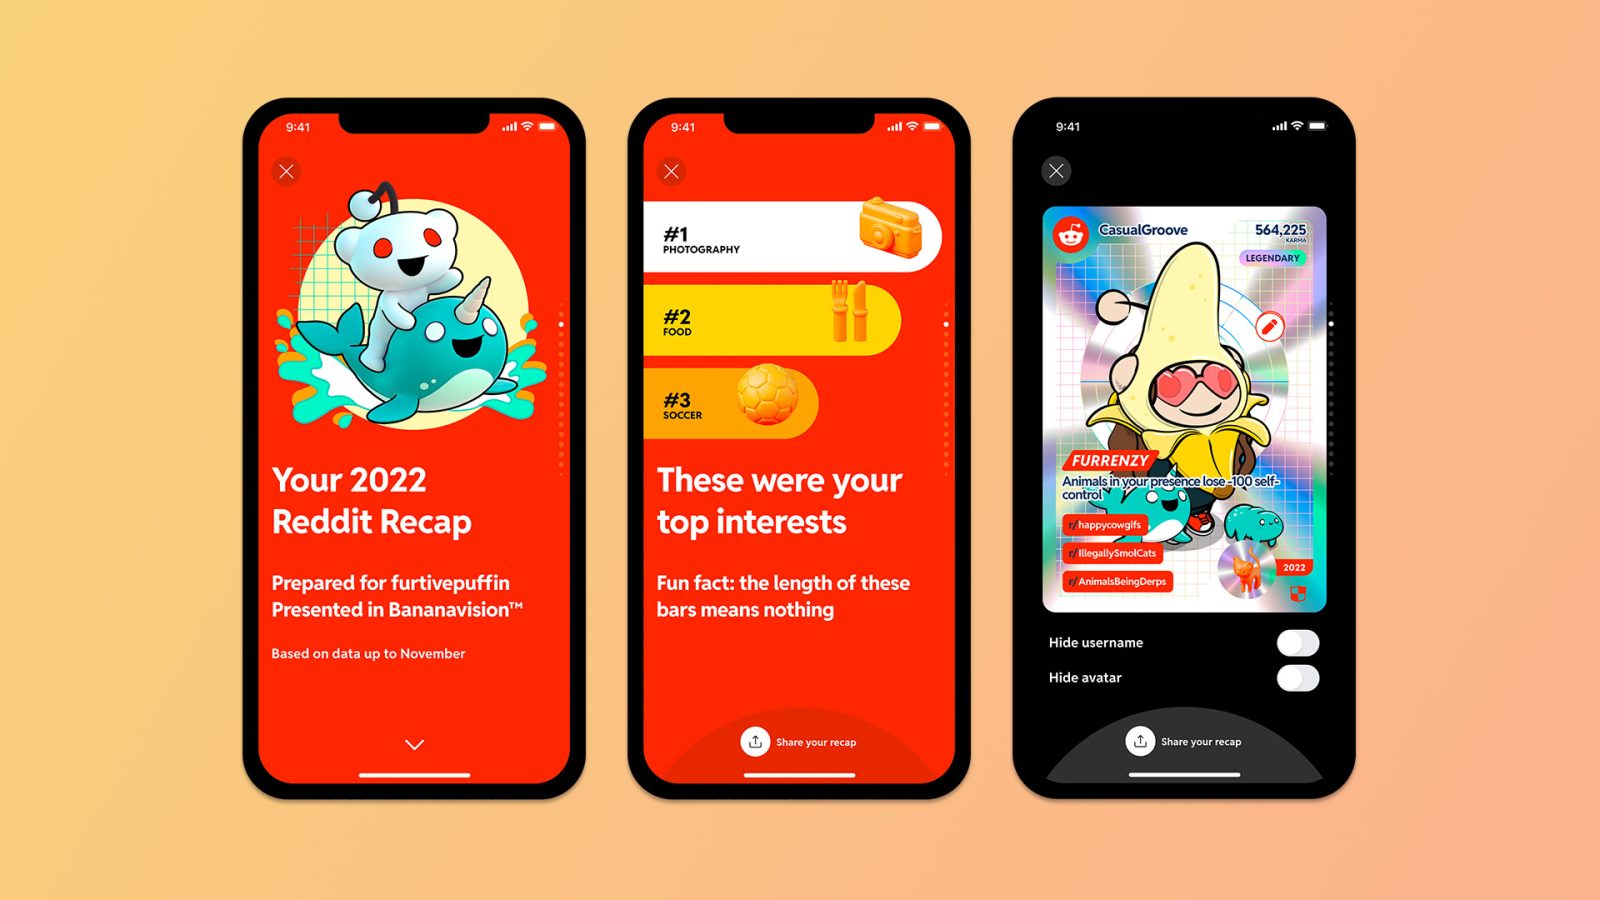 Reddit announces its Recap 2022 with highlights of how users engaged with the platform